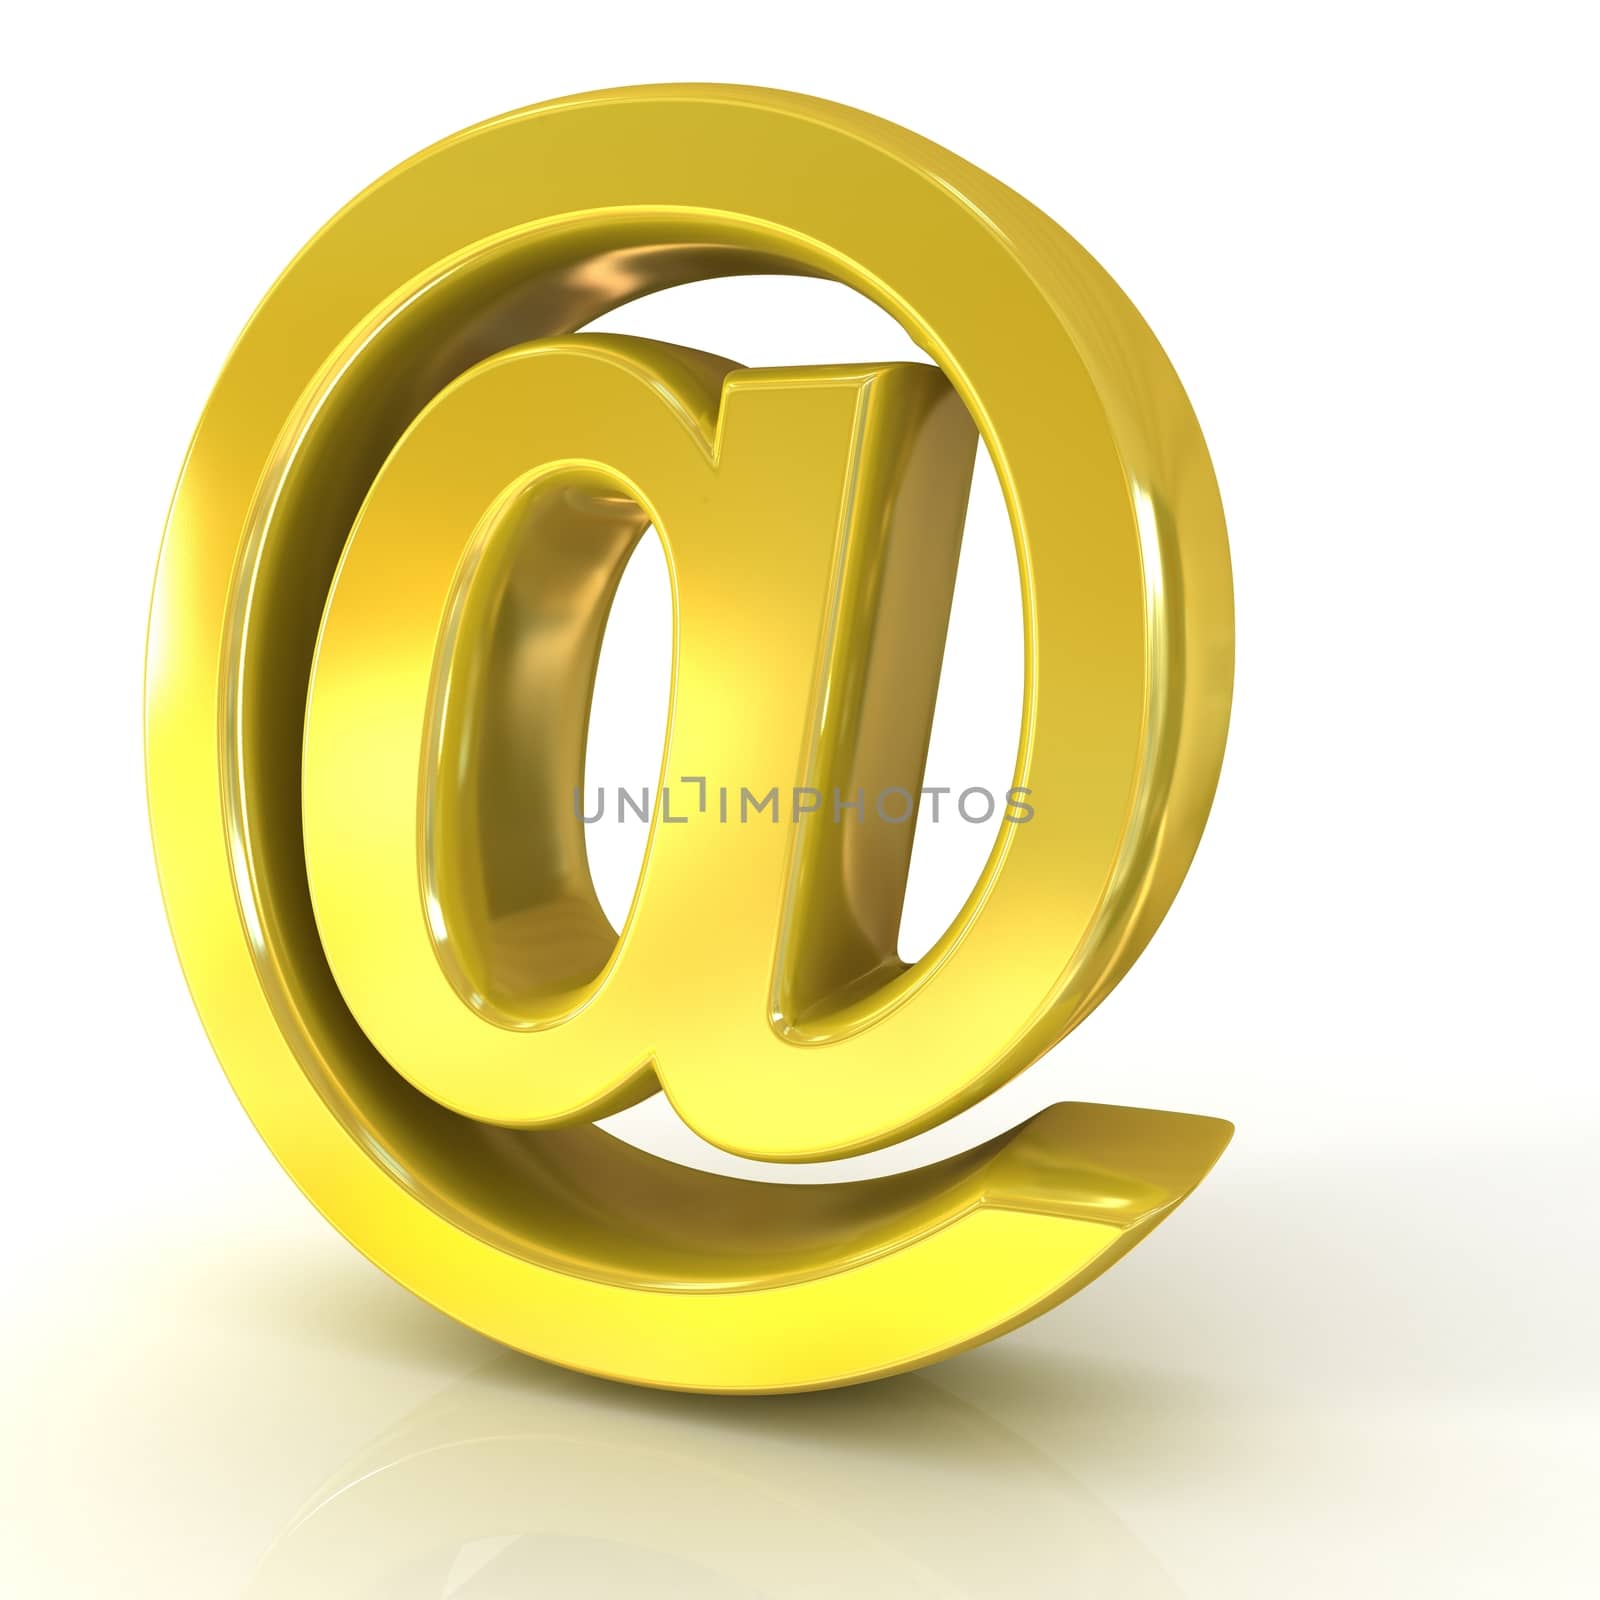 E-mail sign, at symbol, 3D golden by djmilic